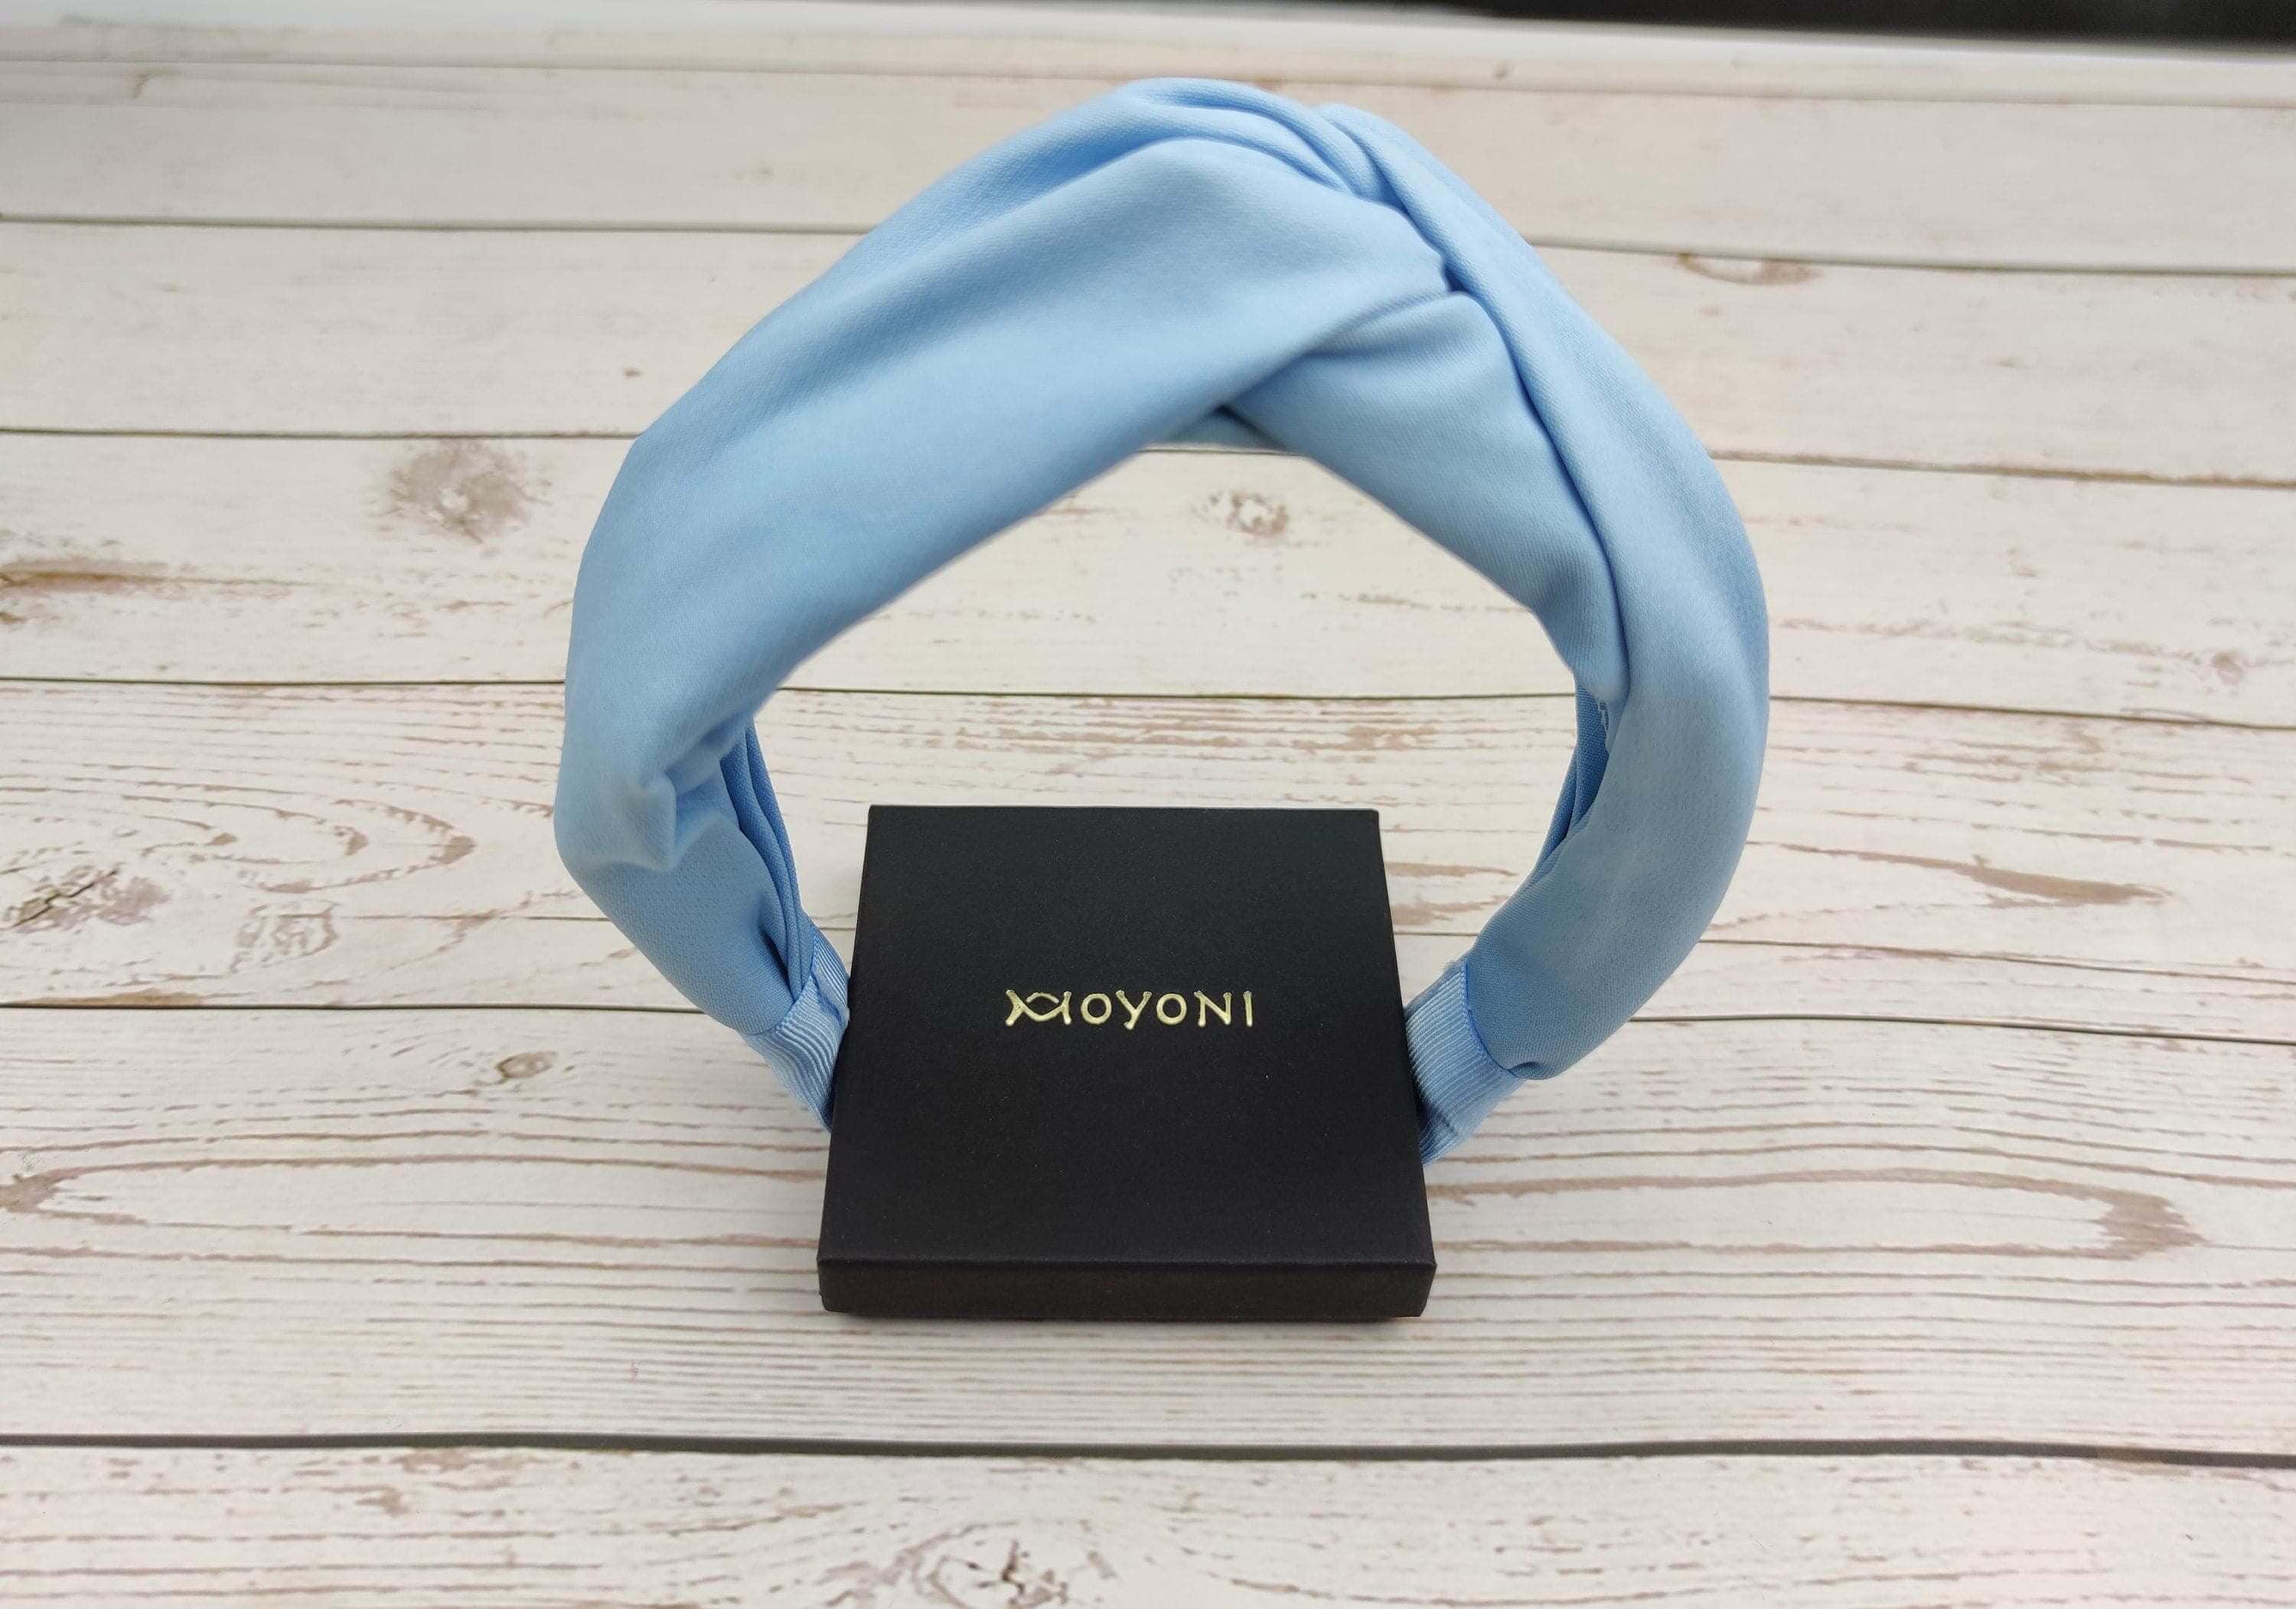 Beautiful Baby Blue Twist Knot Headband - Women's Classic and Fashionable Light Blue Hairband made of Viscose Crepe available at Moyoni Design